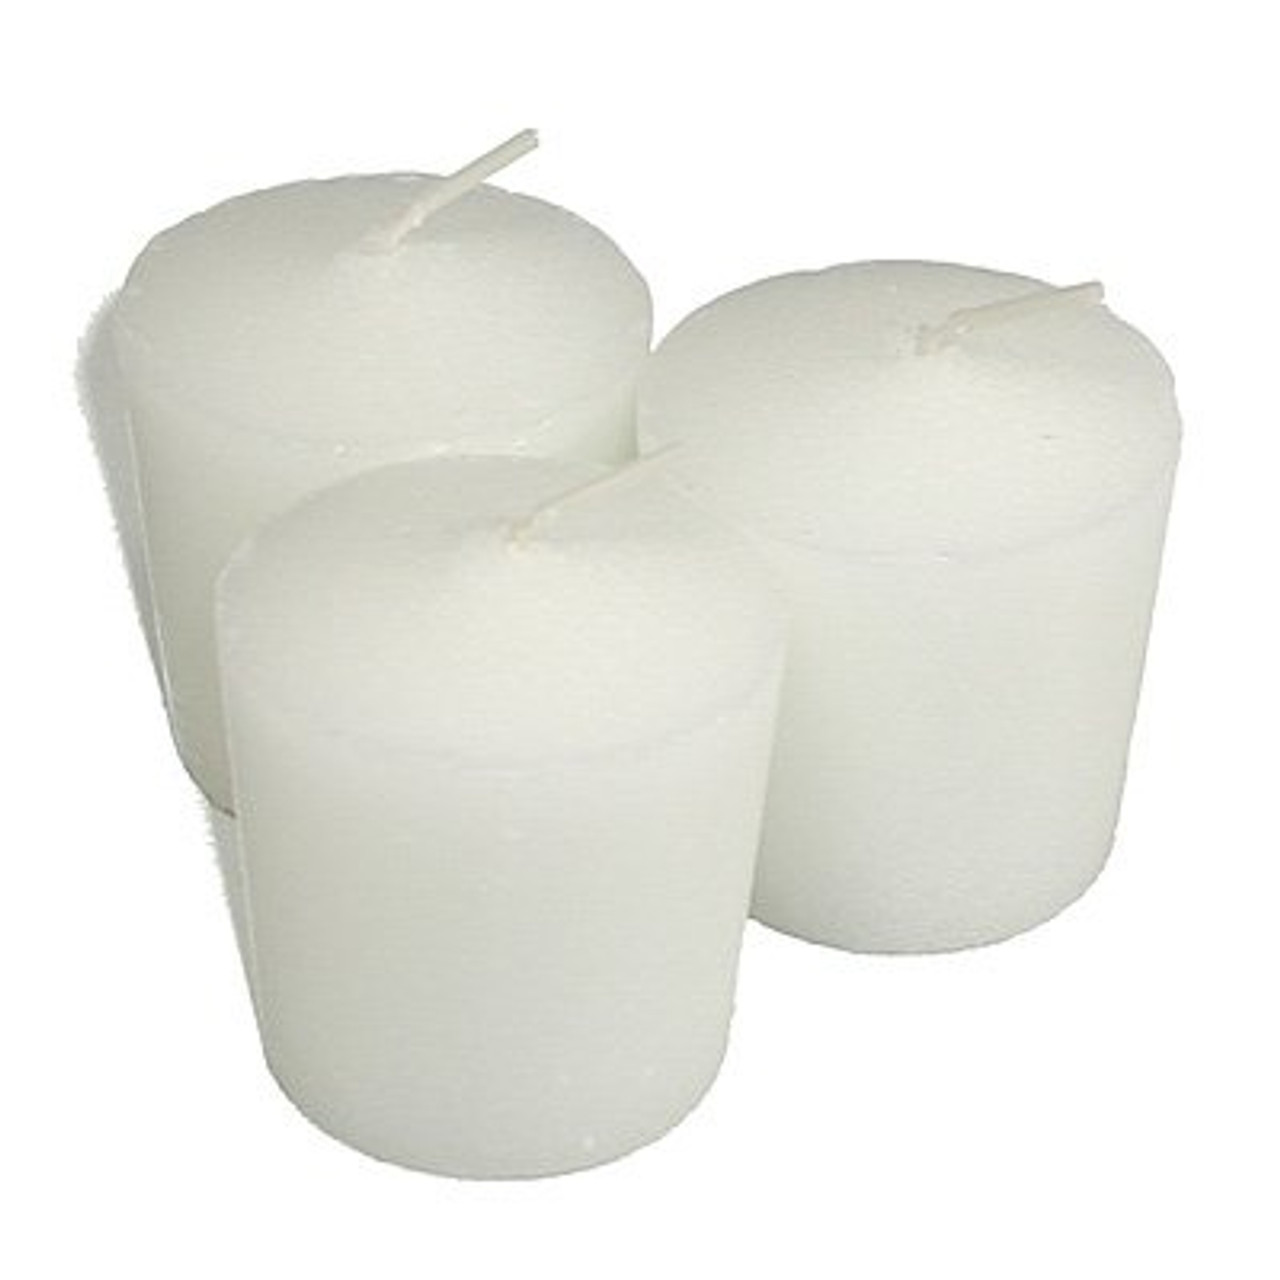 https://cdn11.bigcommerce.com/s-v3fld/images/stencil/1280x1280/products/5555/2317/taper_votive_candles__49800.1397496172.jpg?c=2